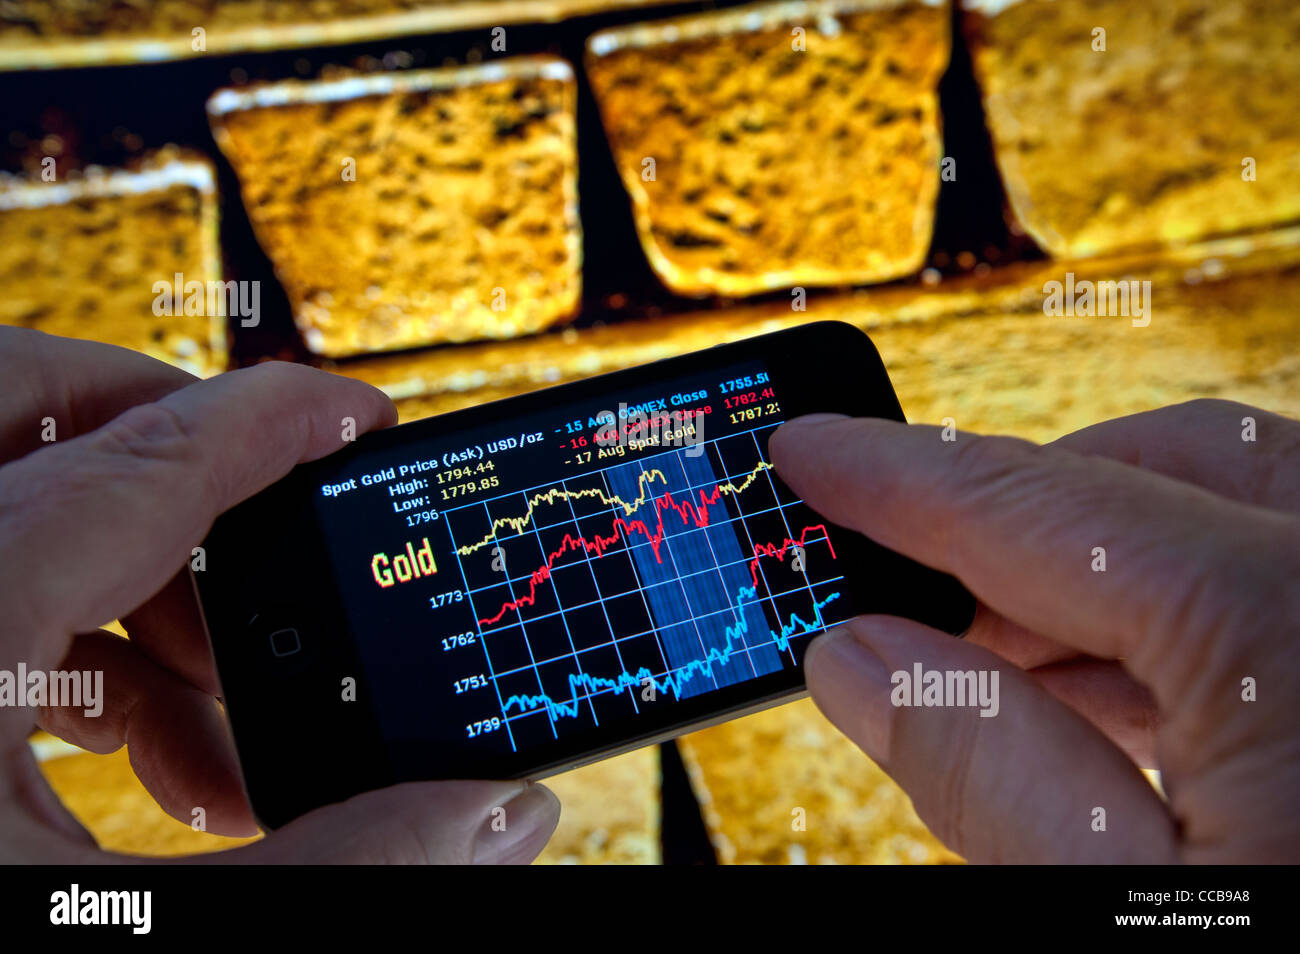 Hands holding Apple iPhone smartphone displaying live on-screen gold bid prices, with pure raw gold bullion bars in background Stock Photo